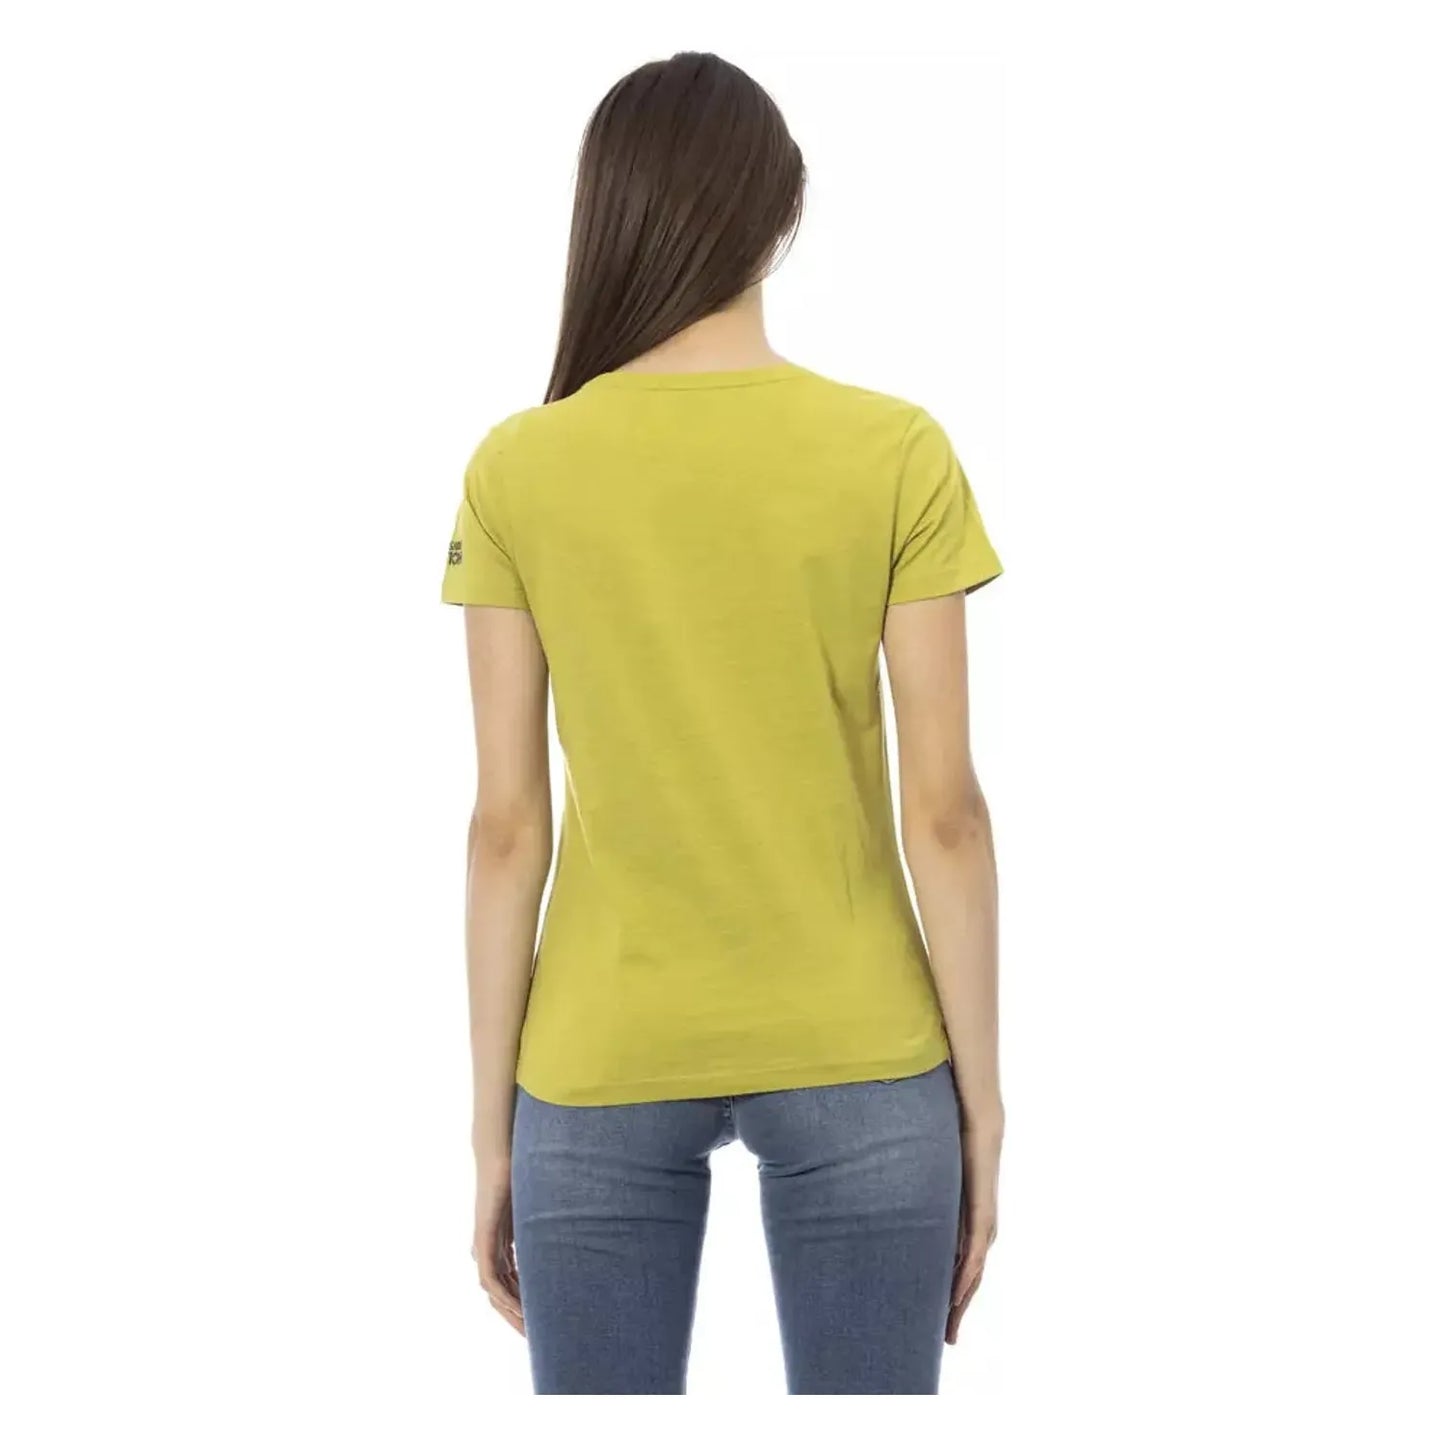 Trussardi Action Chic Green Tee with Artistic Front Print green-cotton-tops-t-shirt-16